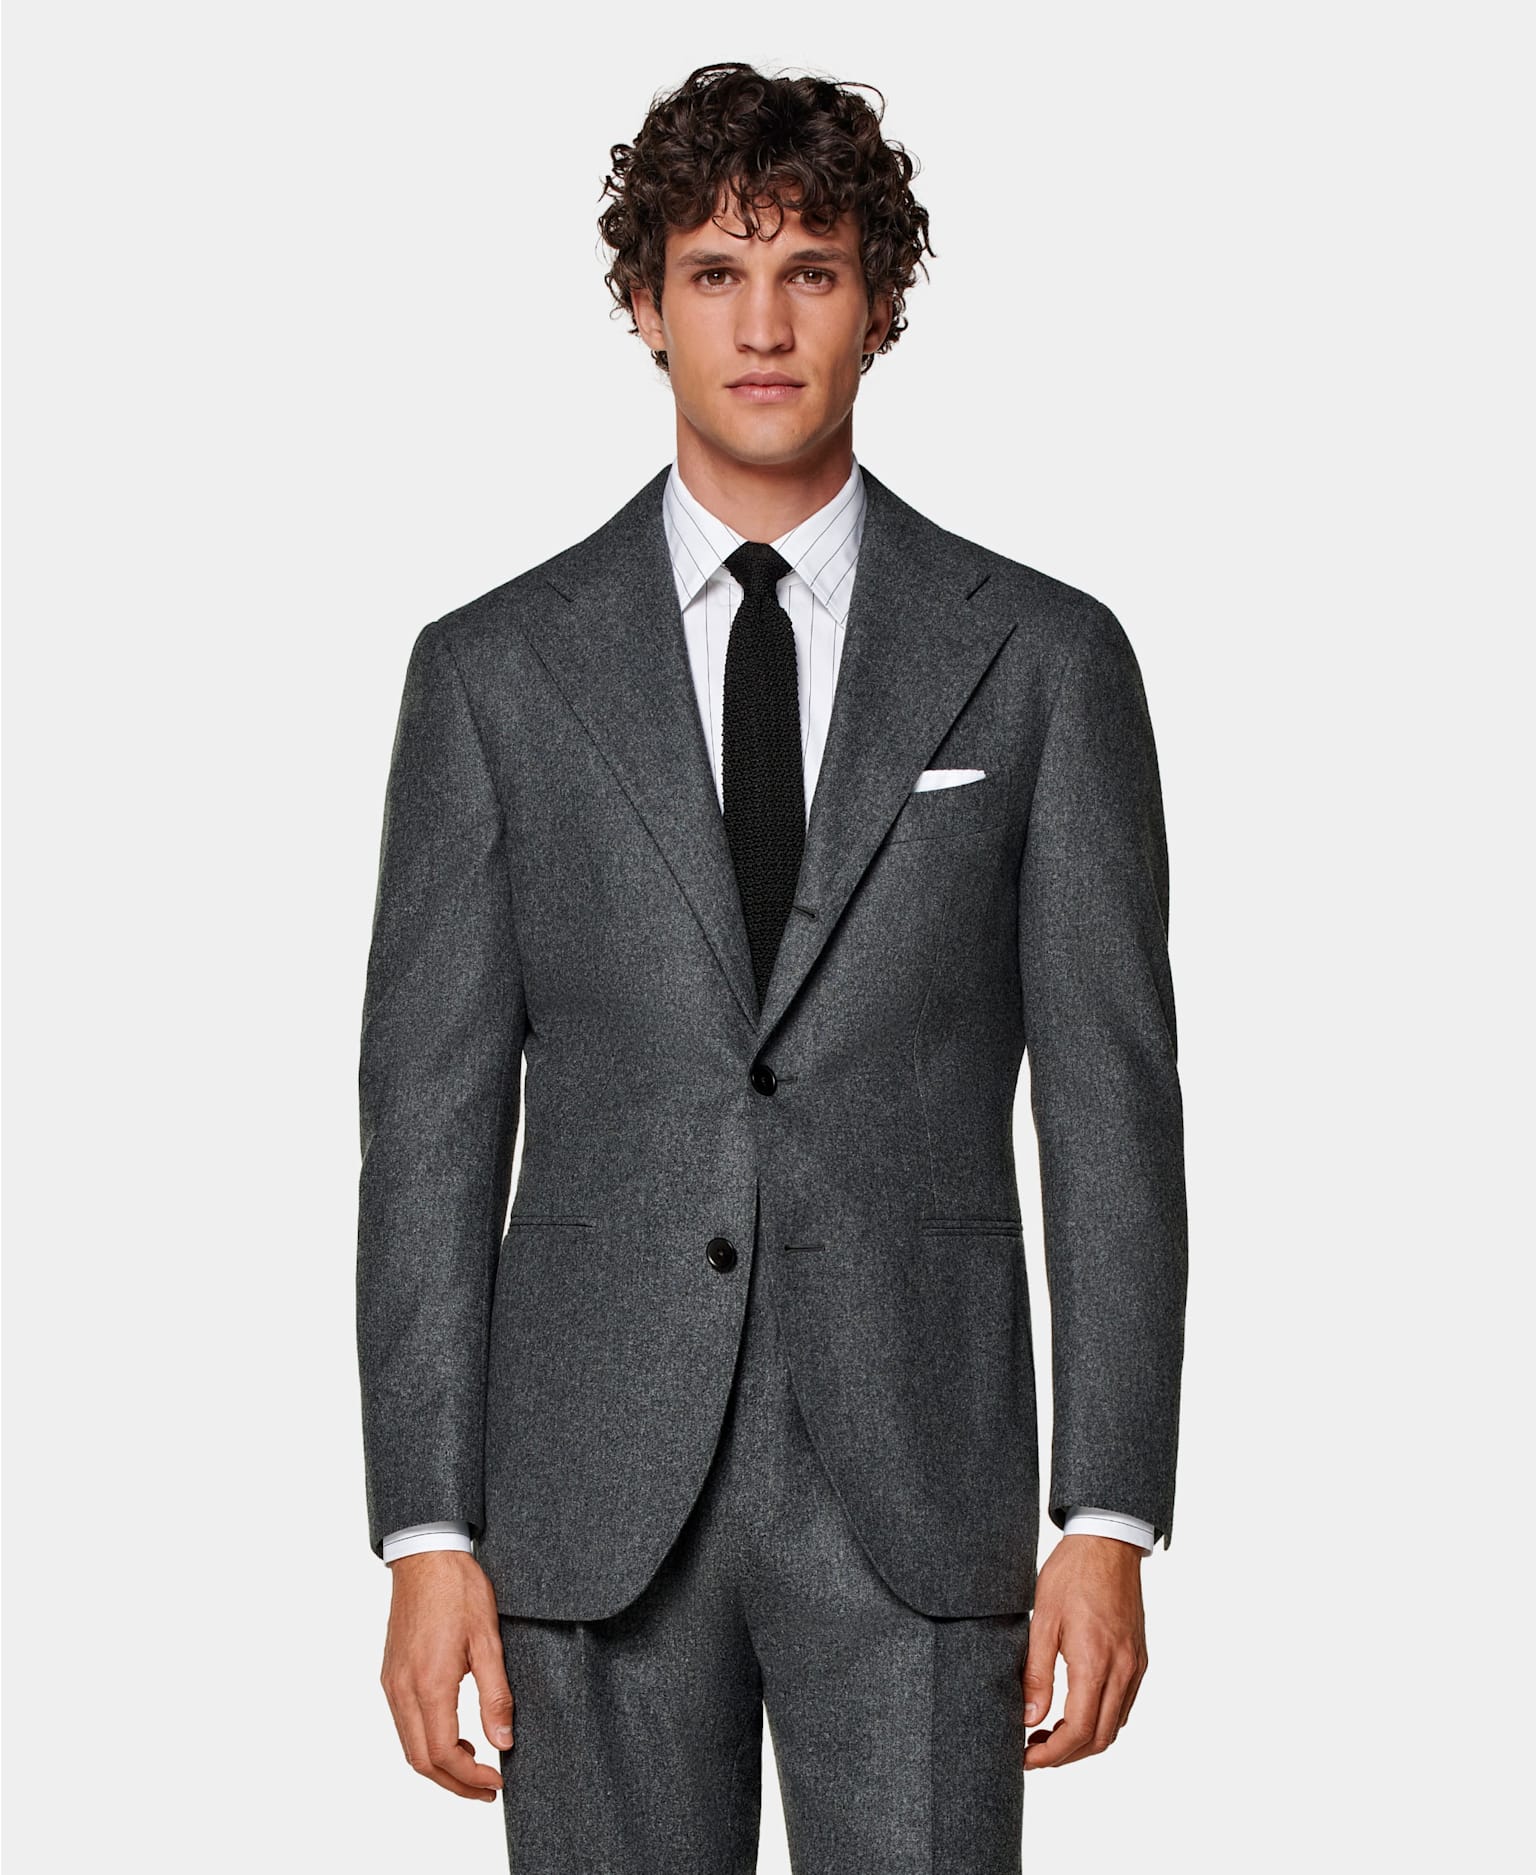 Dark grey single-breasted suit with white striped shirt and black knitted silk tie.